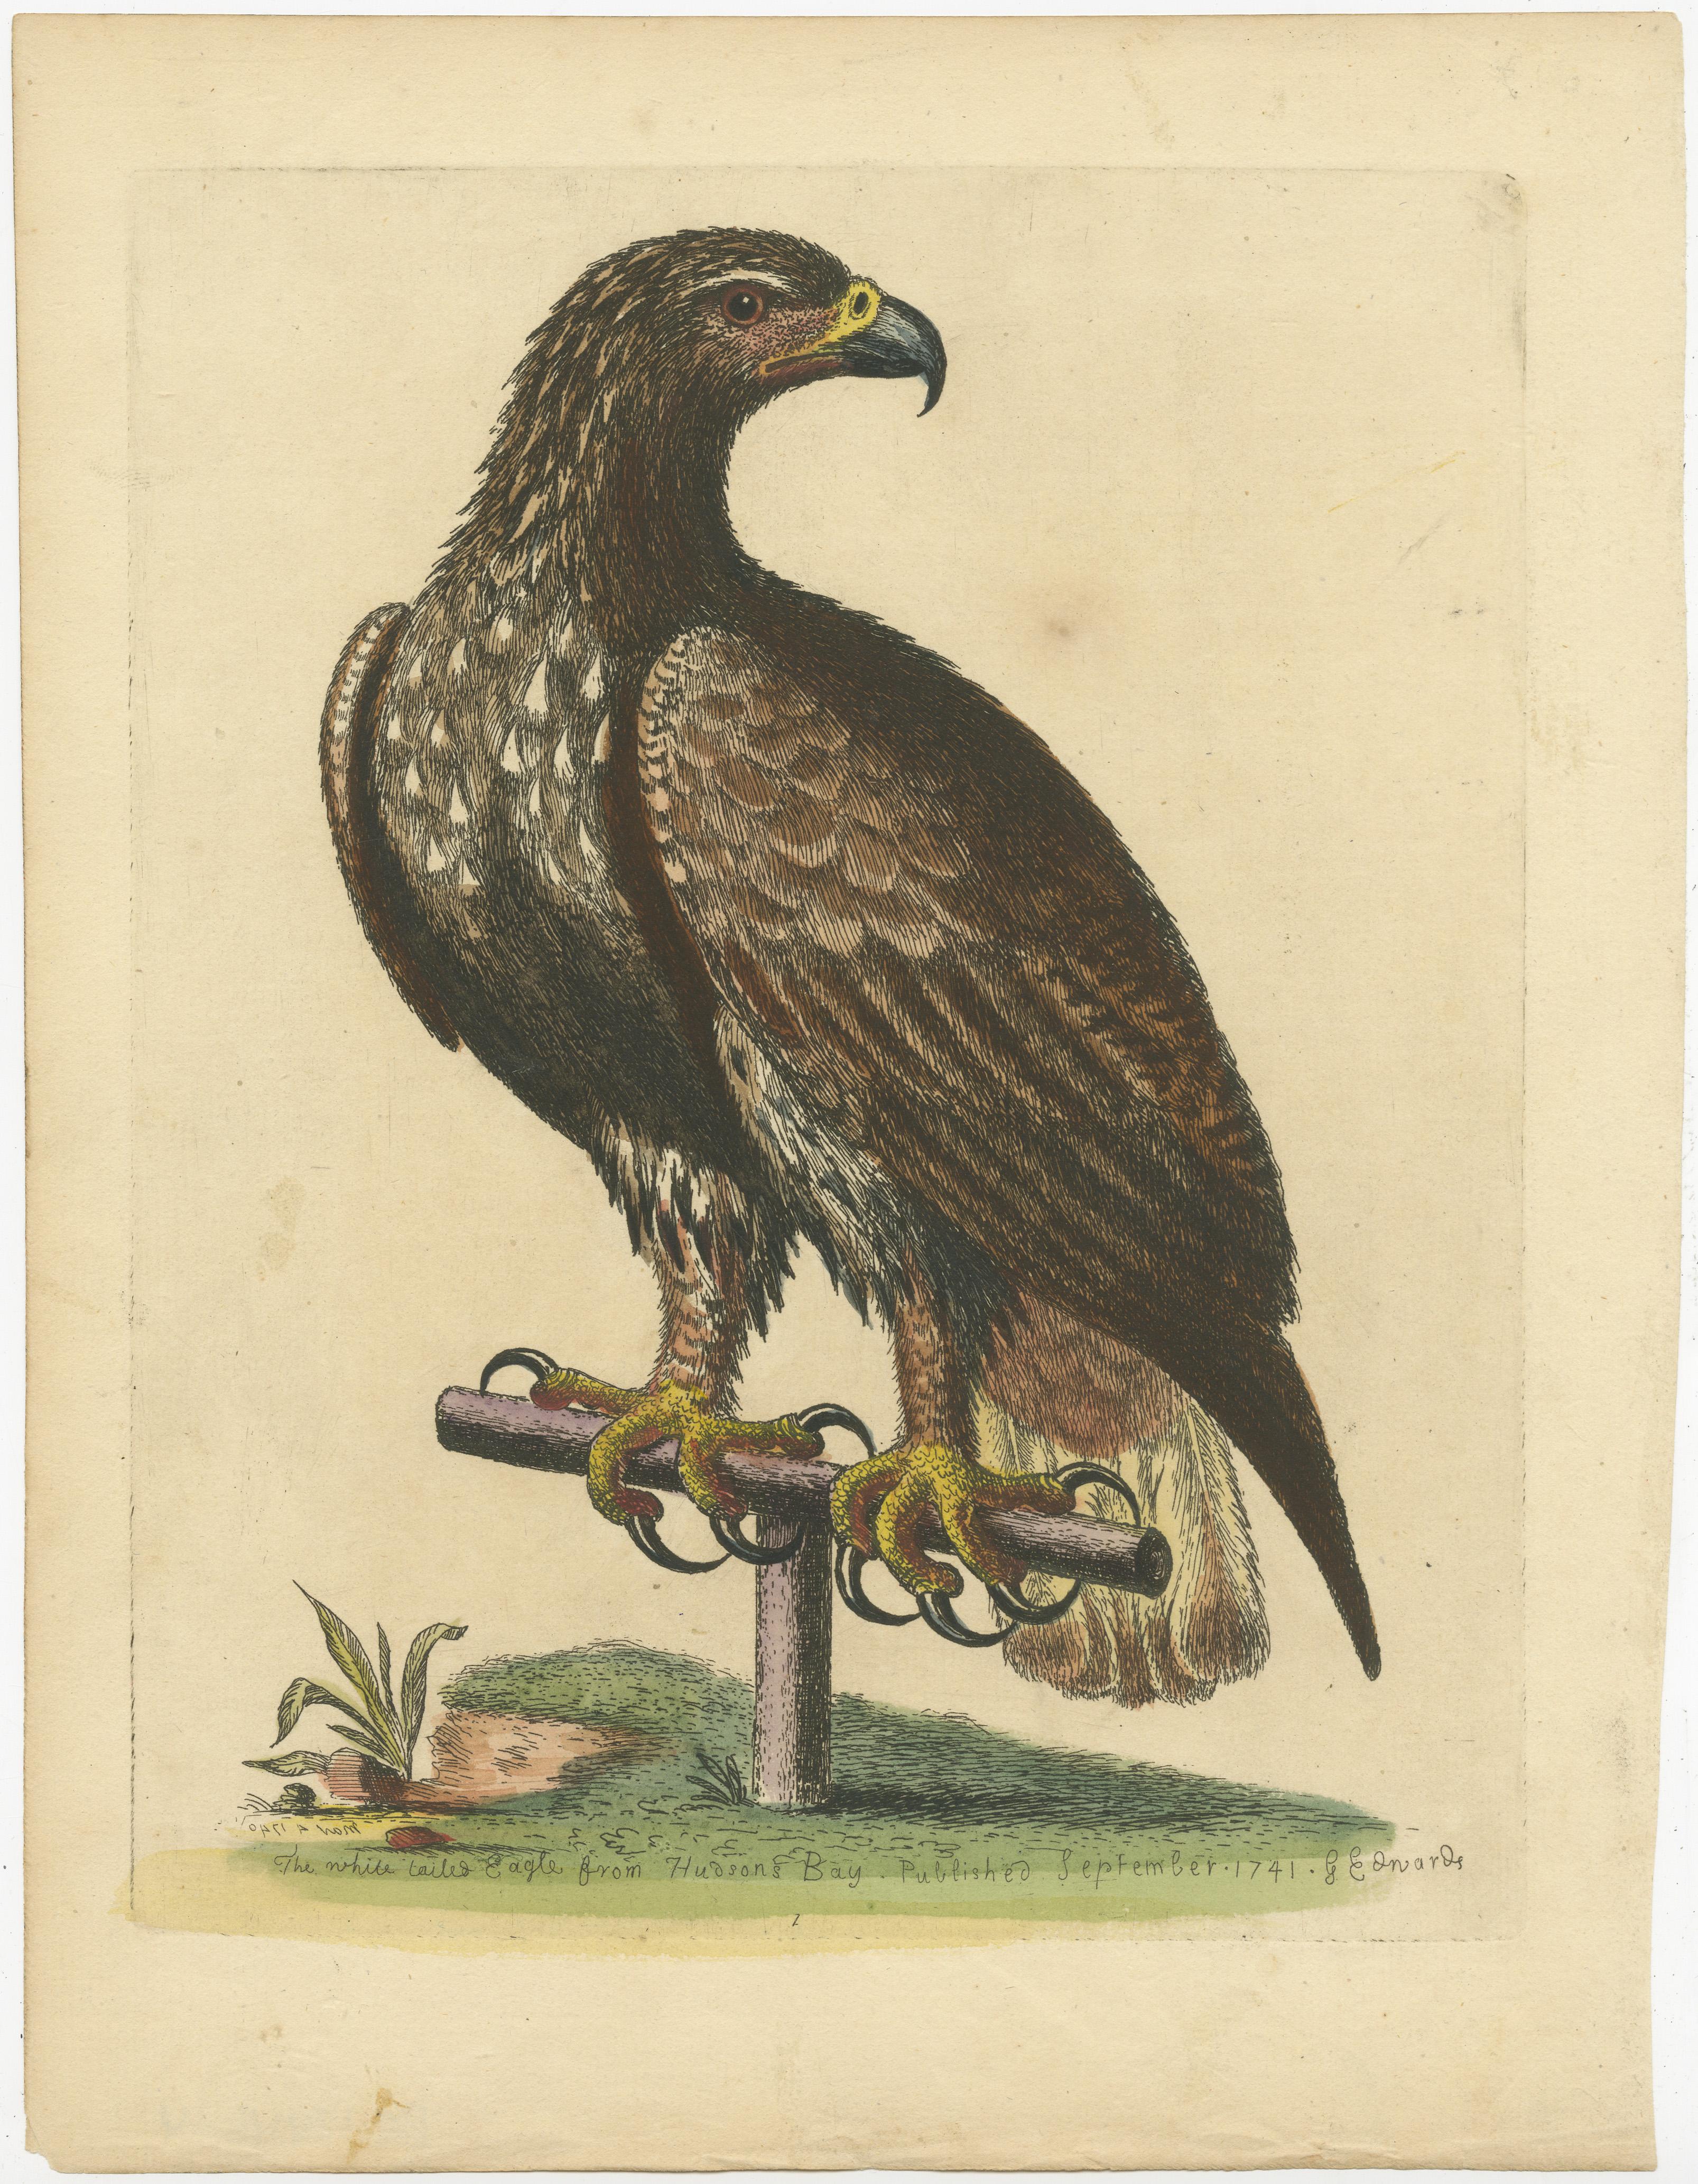 Original antique bird print of a white-tailed eagle. Published by George Edwards circa 1750. 

George Edwards FRS (3 April 1694 – 23 July 1773) was an English naturalist and ornithologist, known as the 